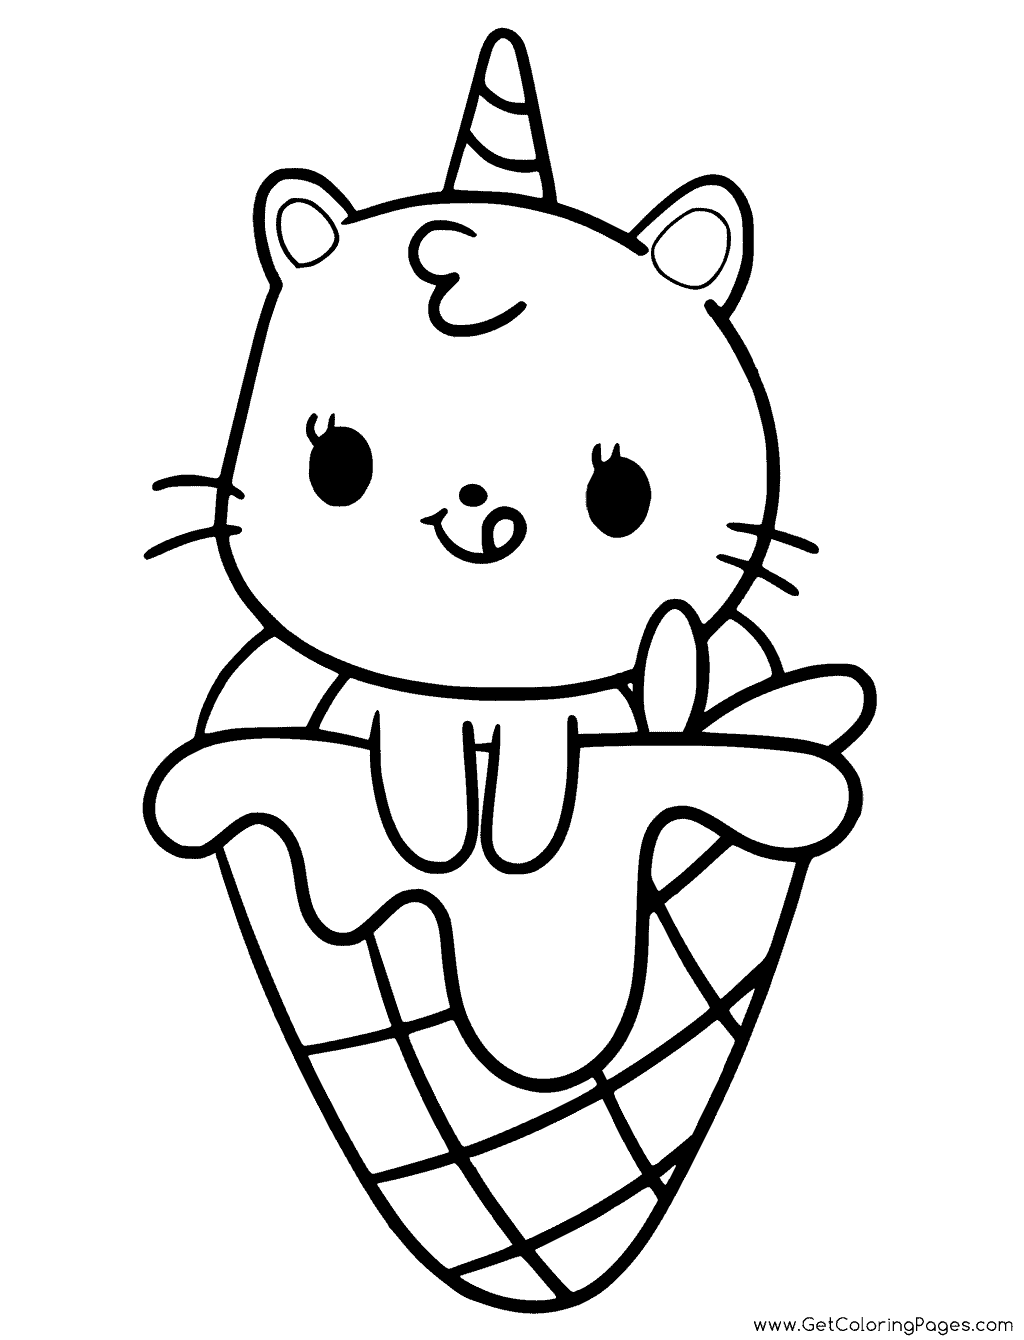 Cutest Unicorn Cat Coloring Page (Free!) Pretty Plants - Coloring Home